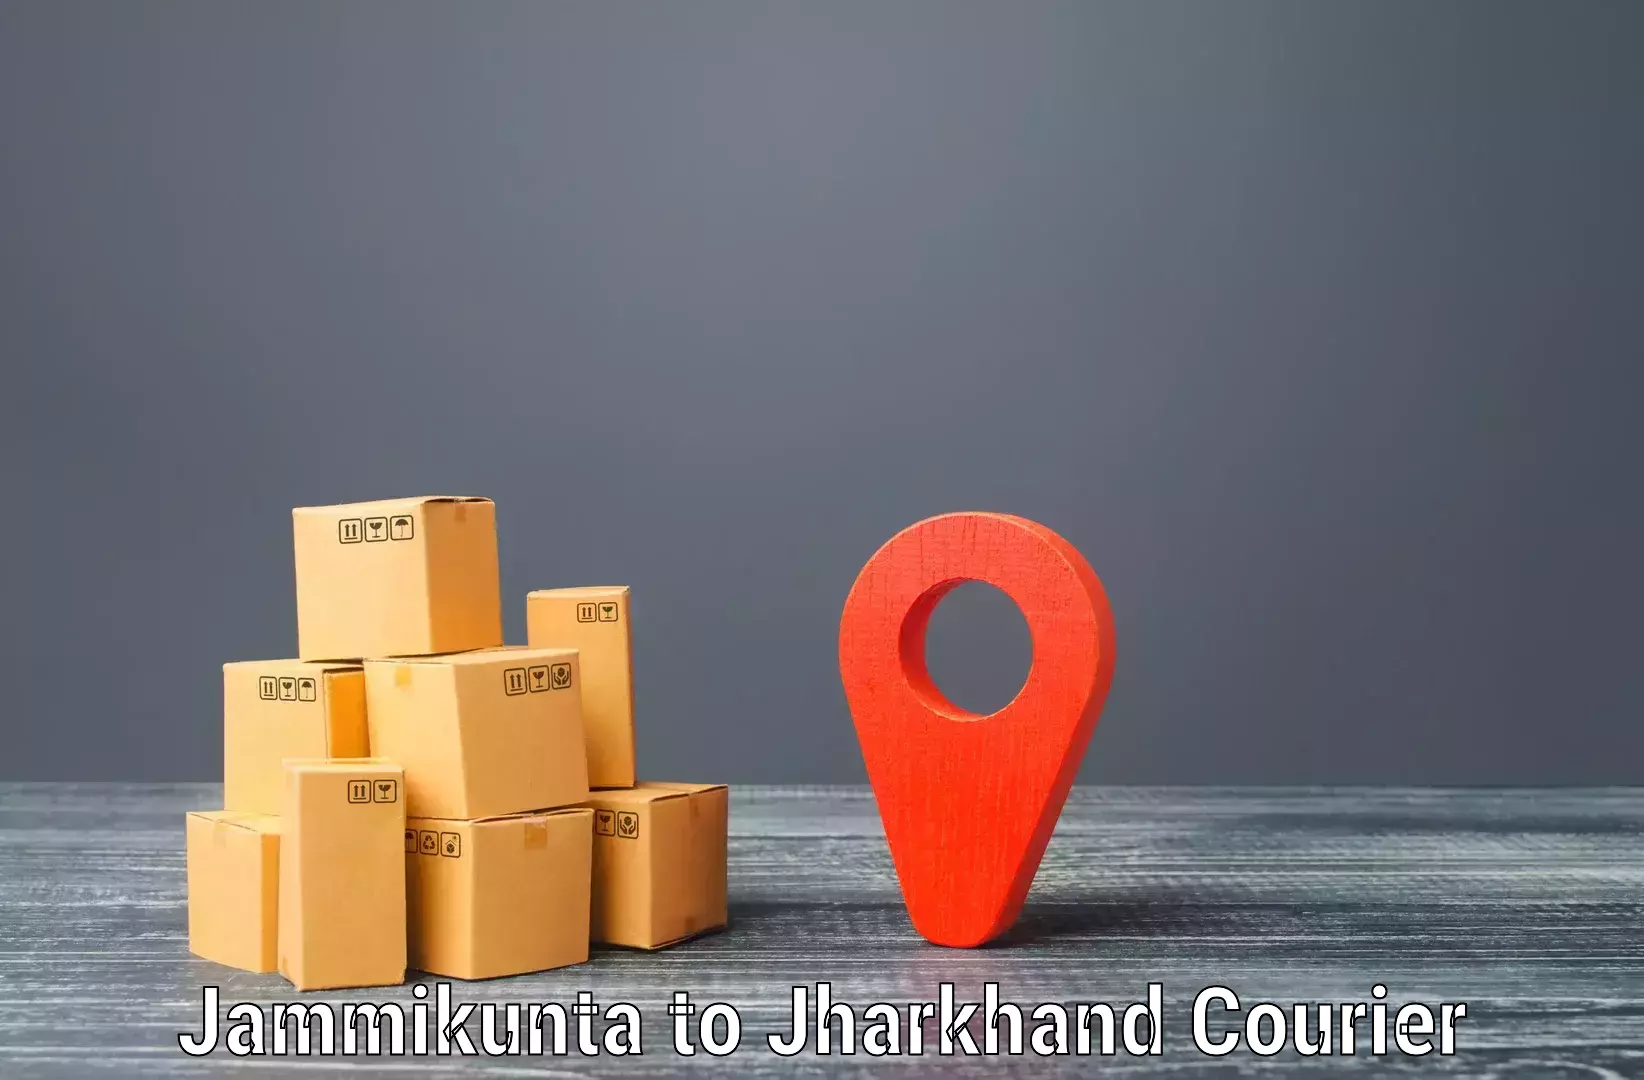 State-of-the-art courier technology Jammikunta to Tisri